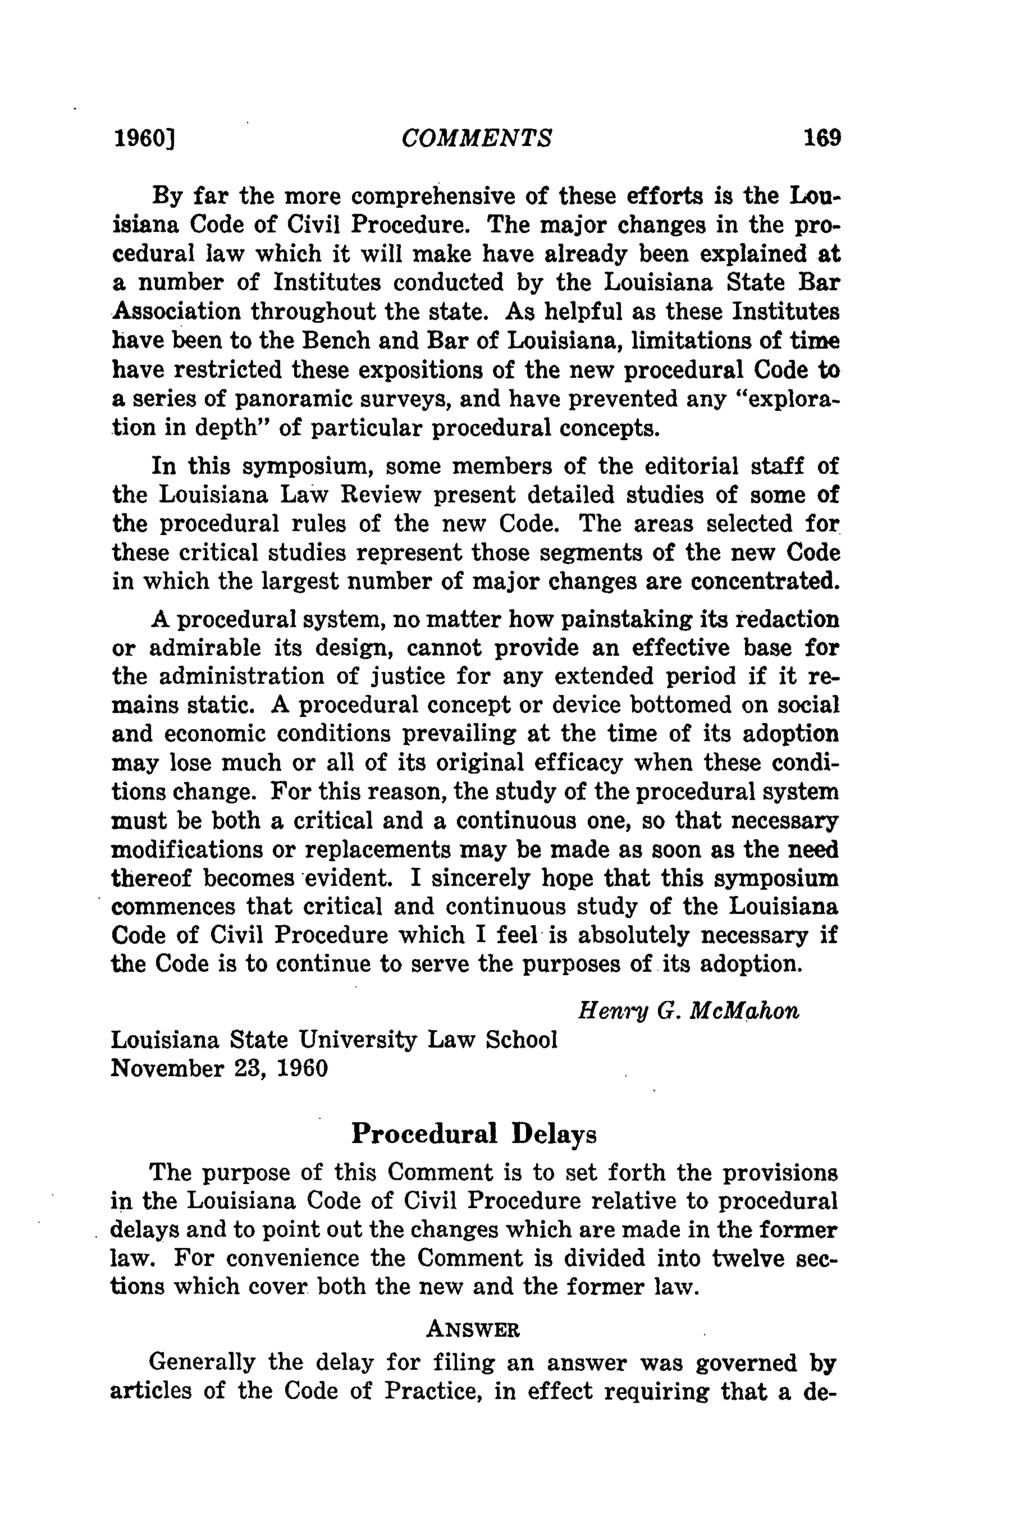 1960] COMMENTS By far the more comprehensive of these efforts is the Louisiana Code of Civil Procedure.